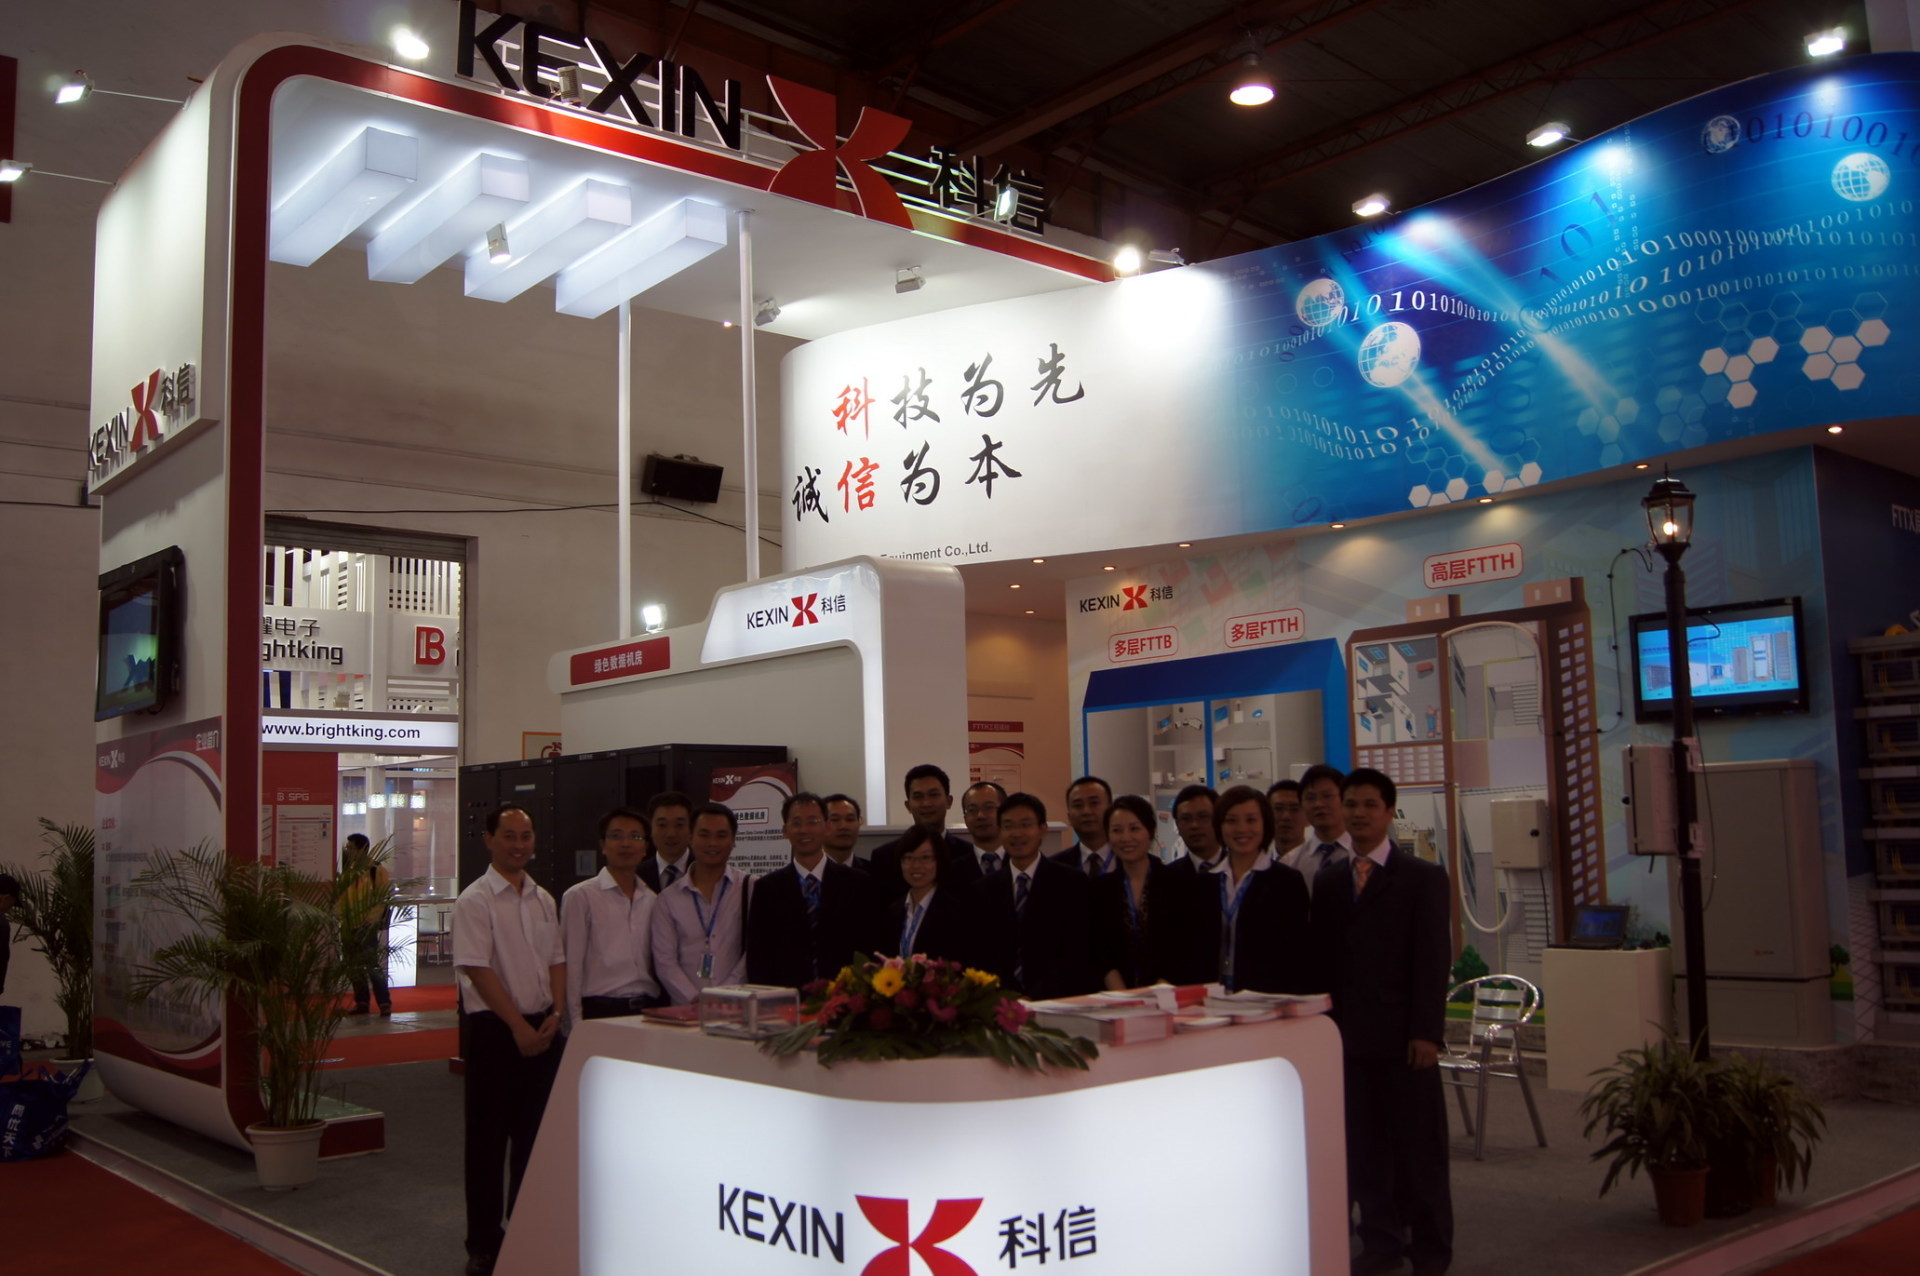 The Kexin communication to participate in the 2011 Beijing Telecommunications Exhibition